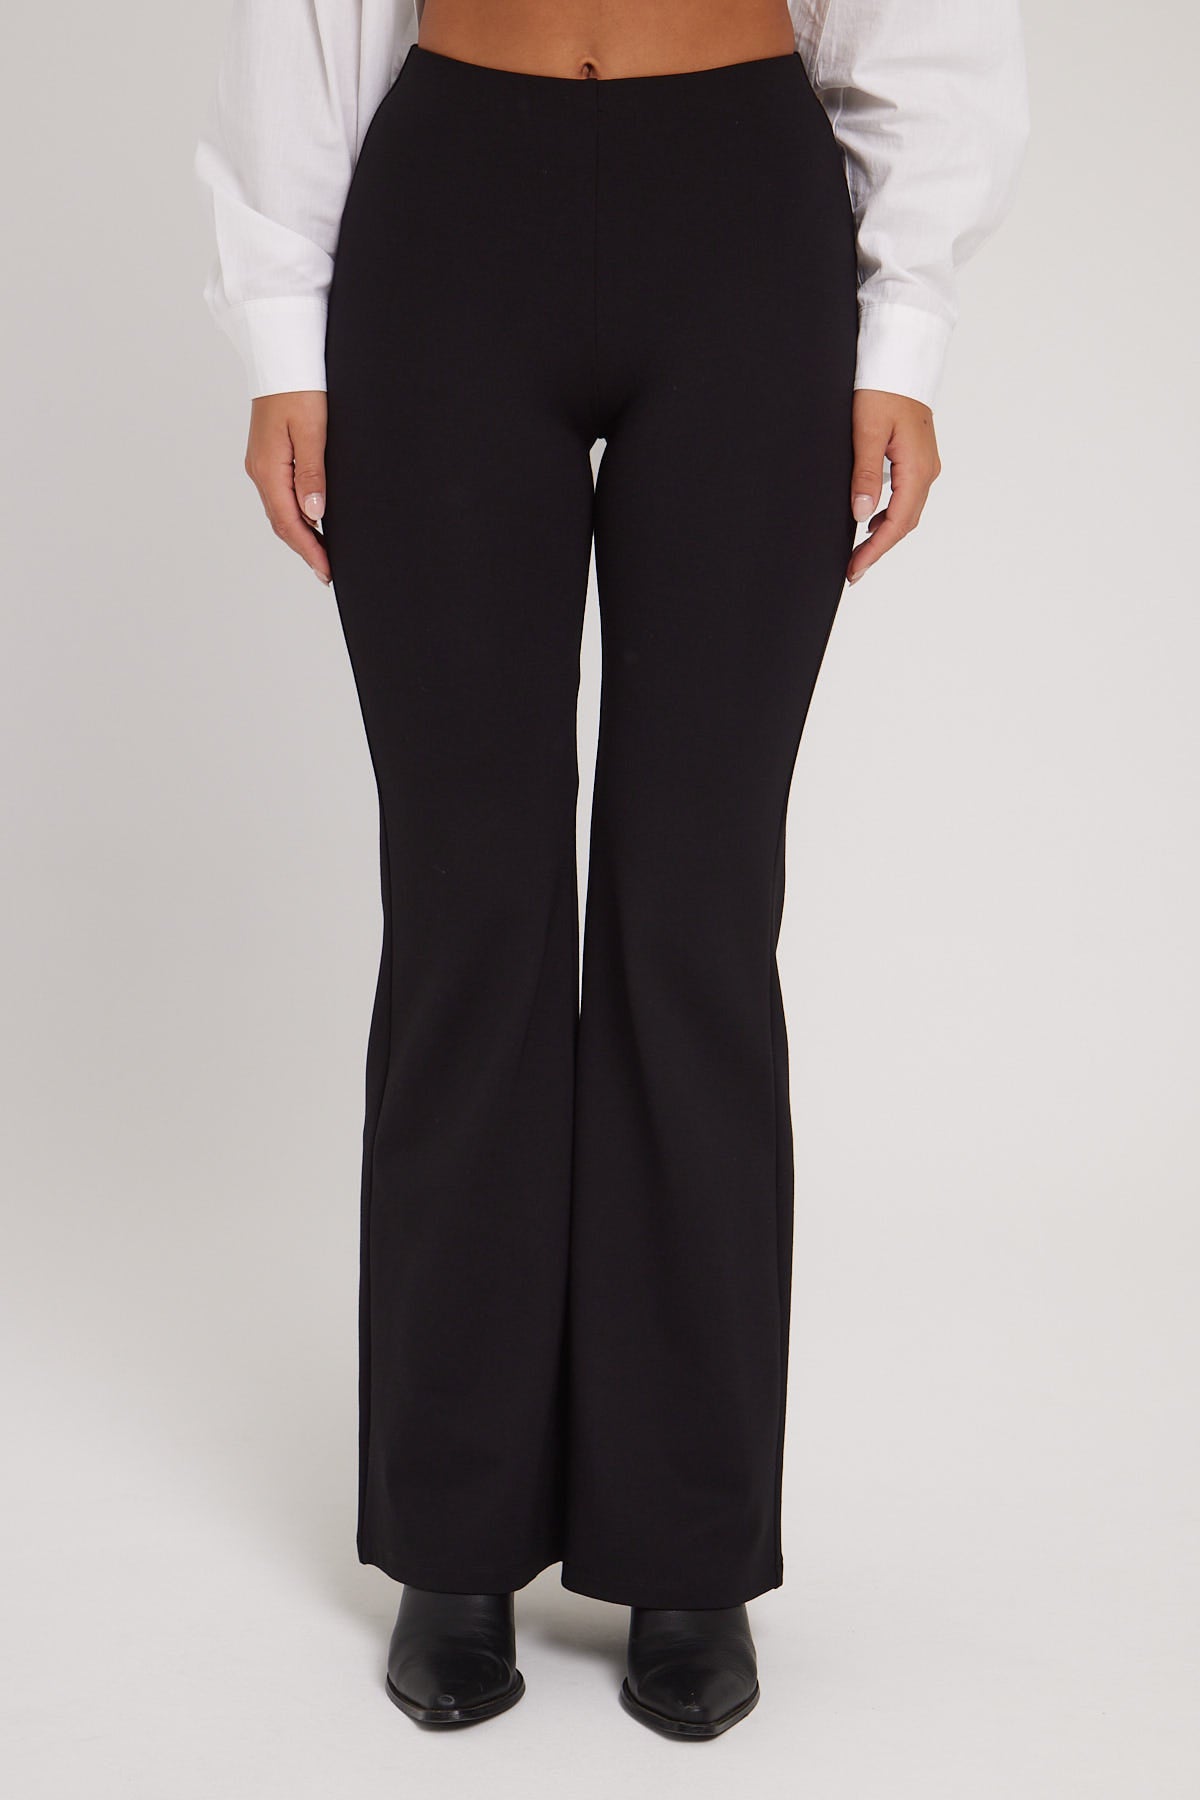 Luck & Trouble Jace Flare Pant Black – Universal Store